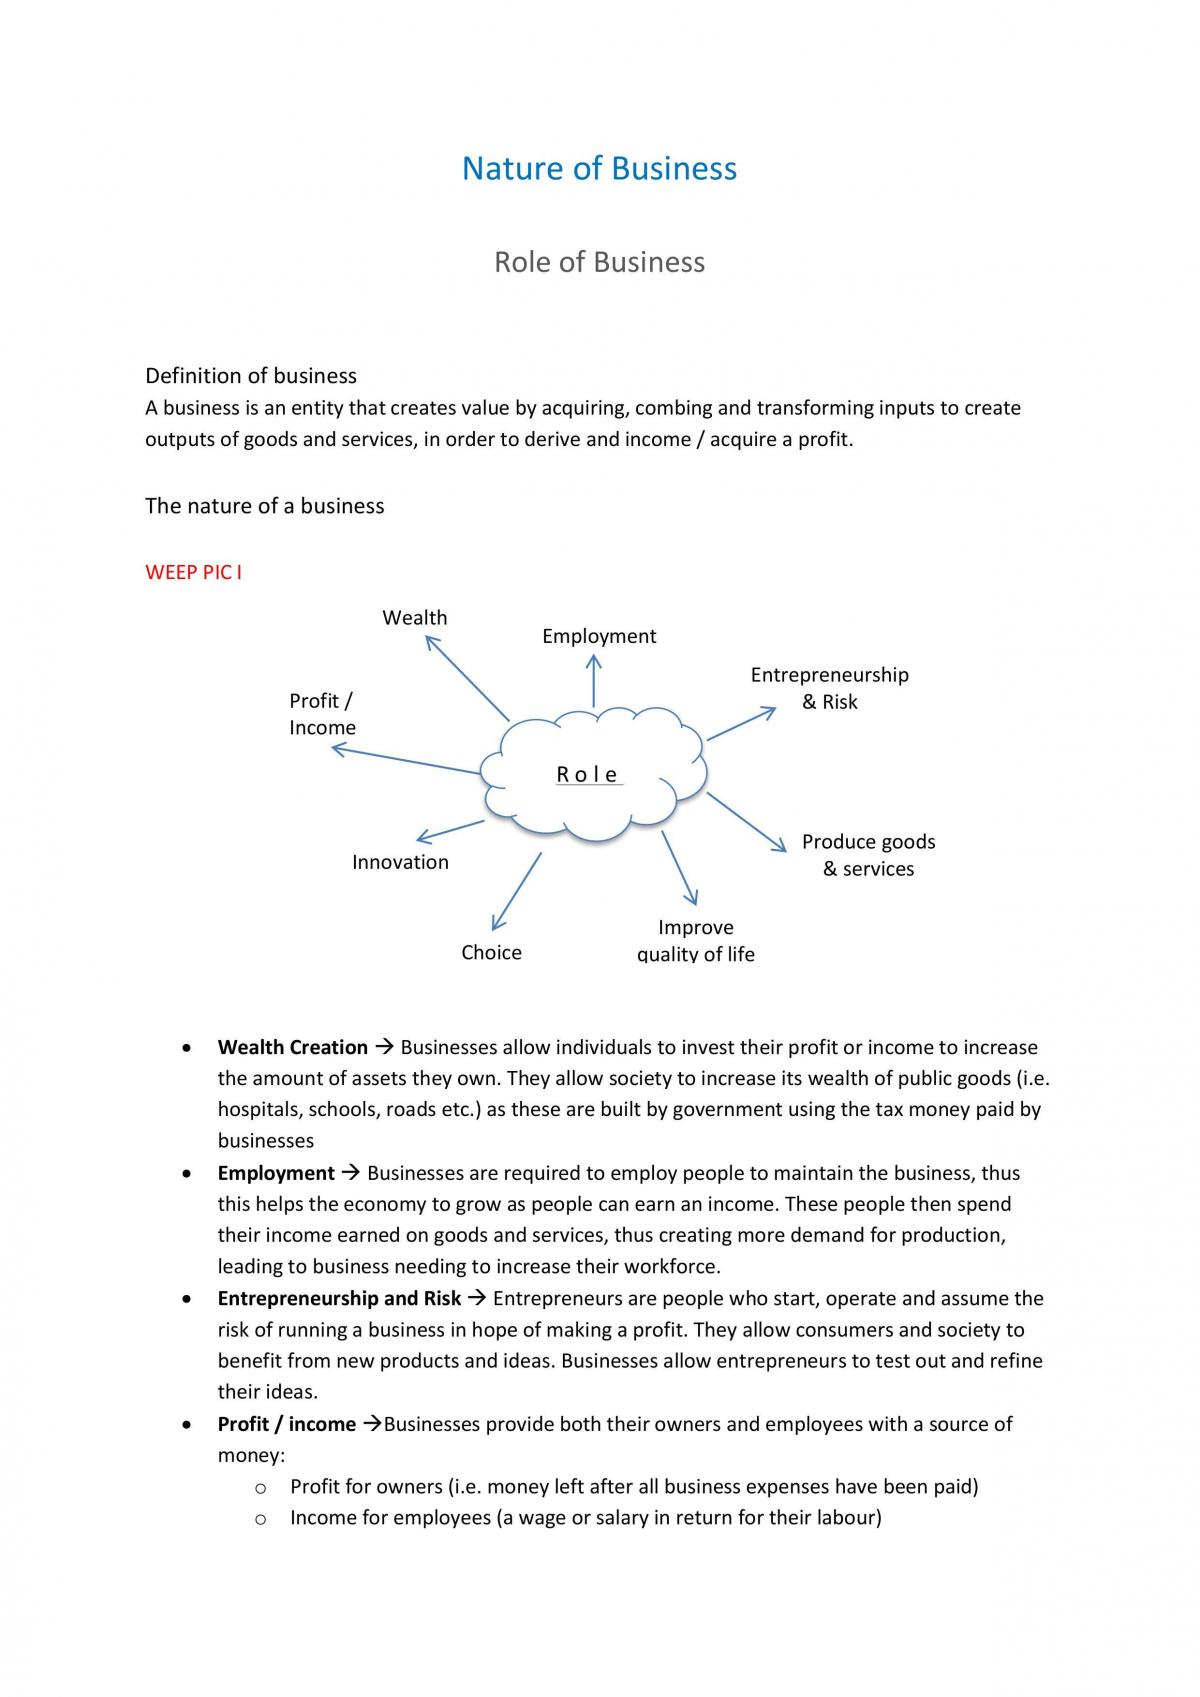 Peliminary Notes on Nature of Business Topic - Page 1